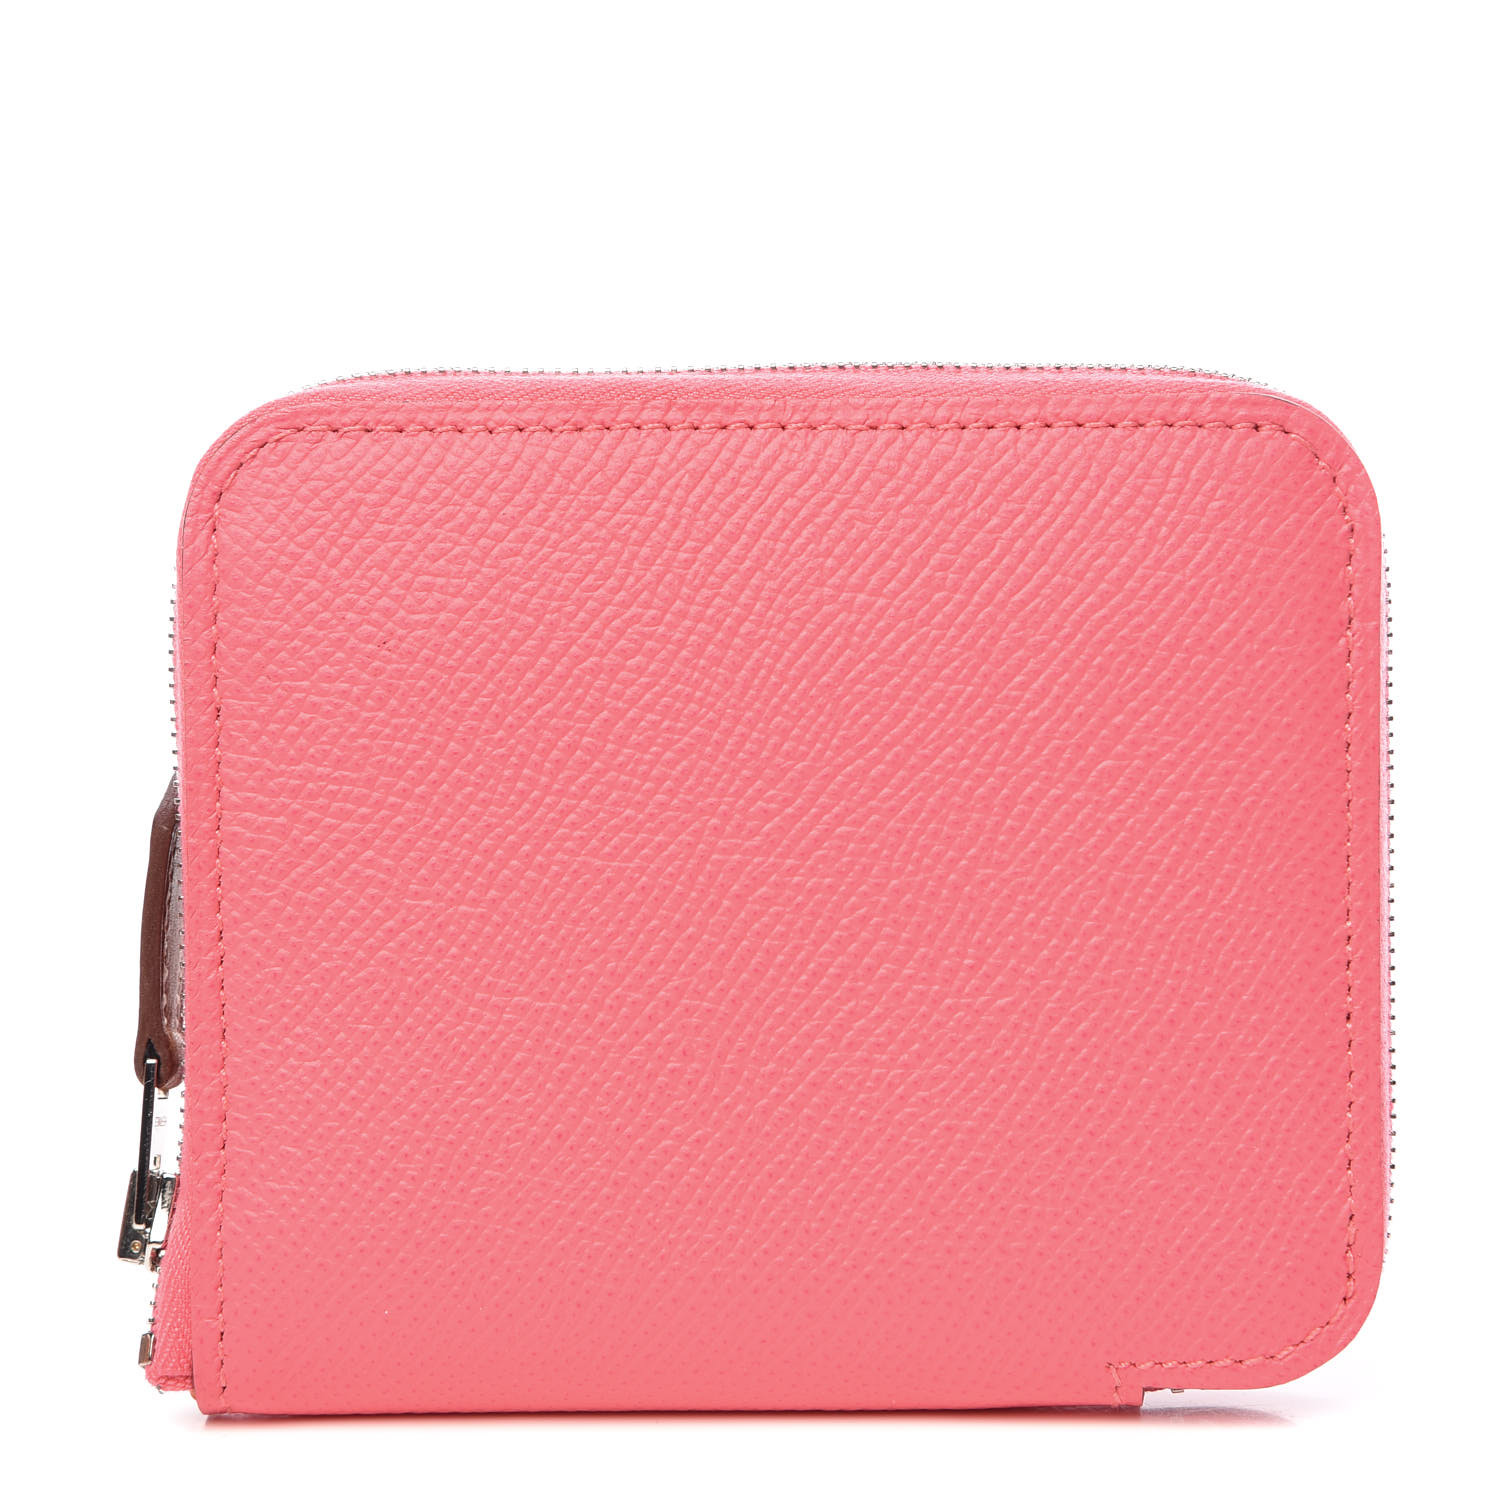 HERMES Epsom Silk'In Compact Wallet Rose Azalee 390050 | FASHIONPHILE